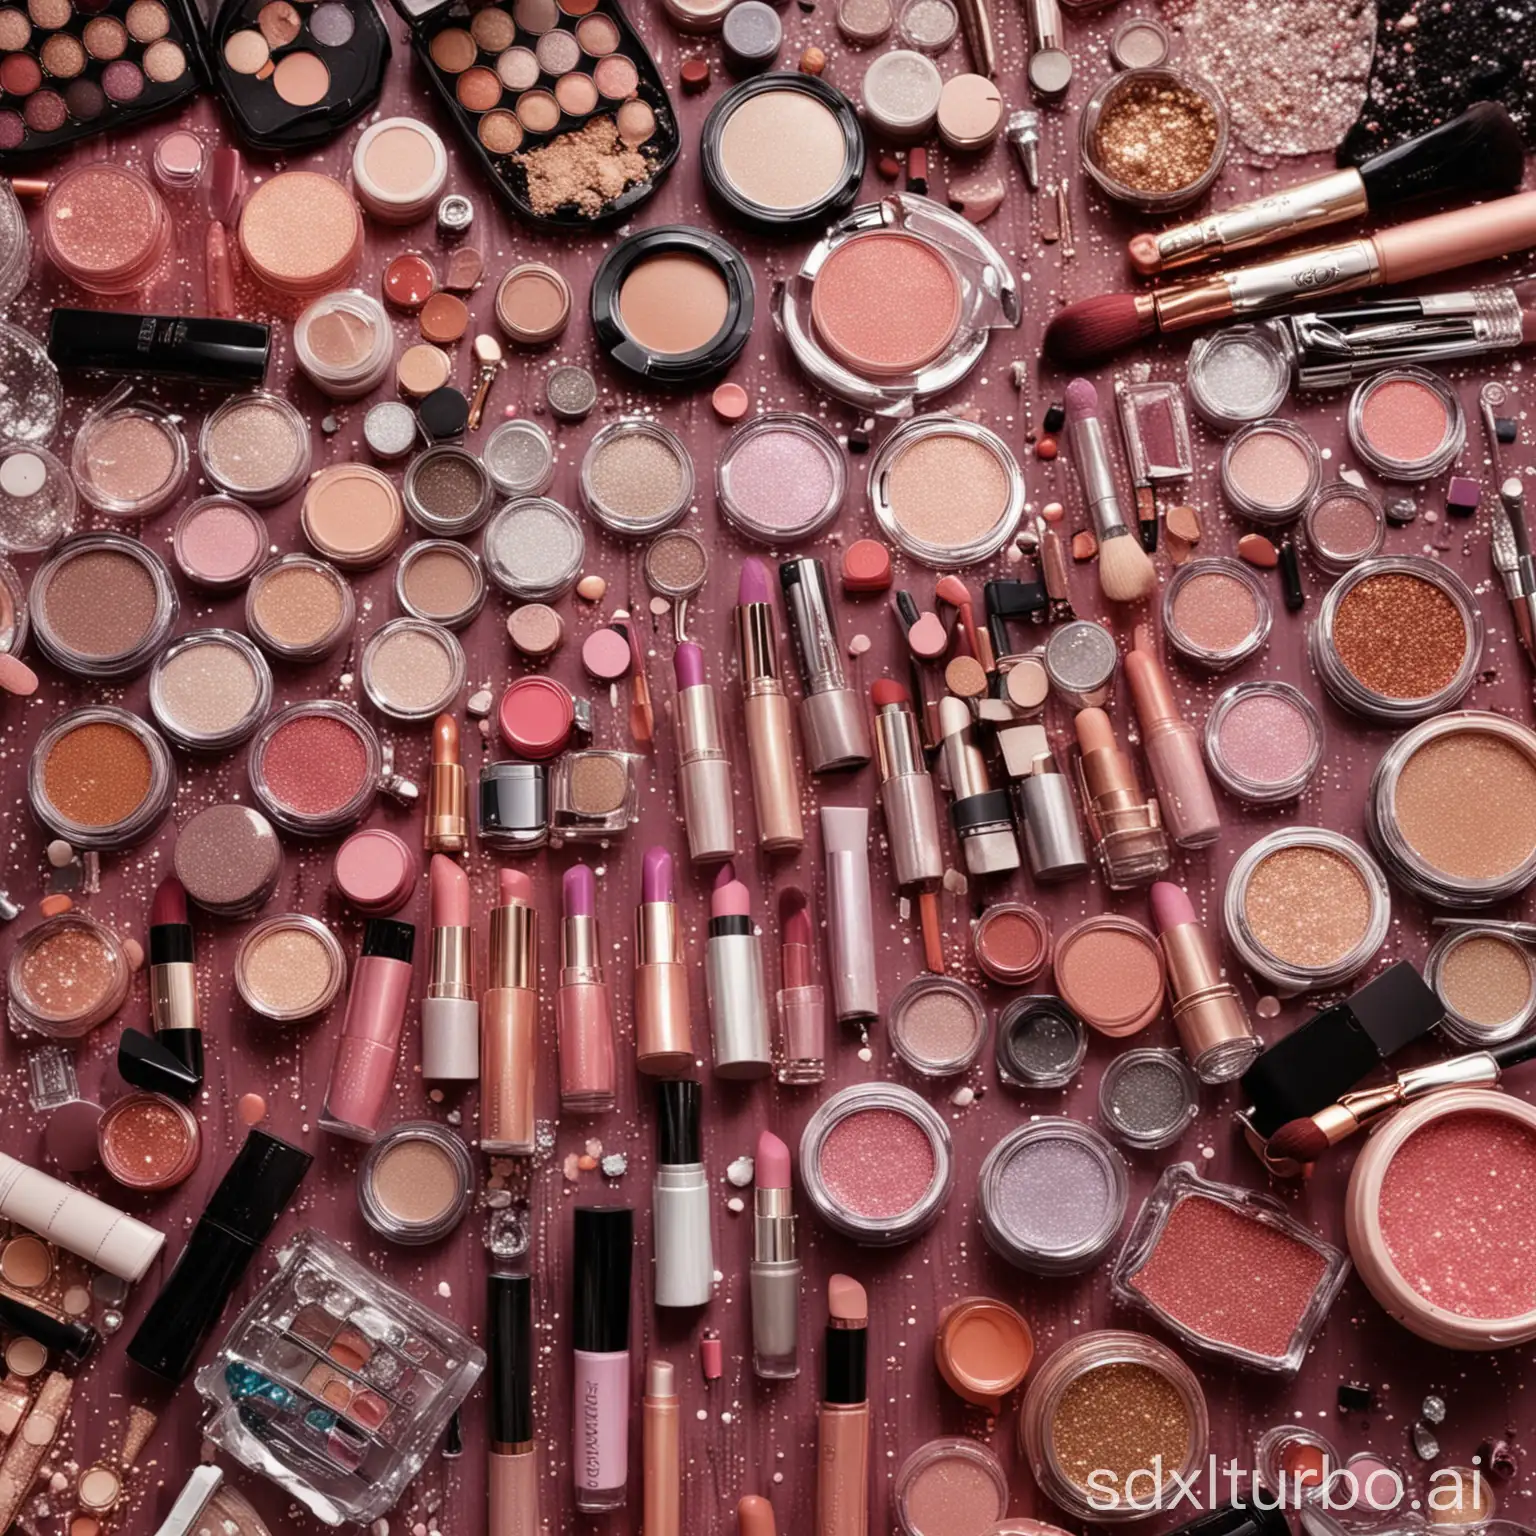 A variety of makeup products and glitters are arranged on a table. The products are in a variety of colors and shapes.